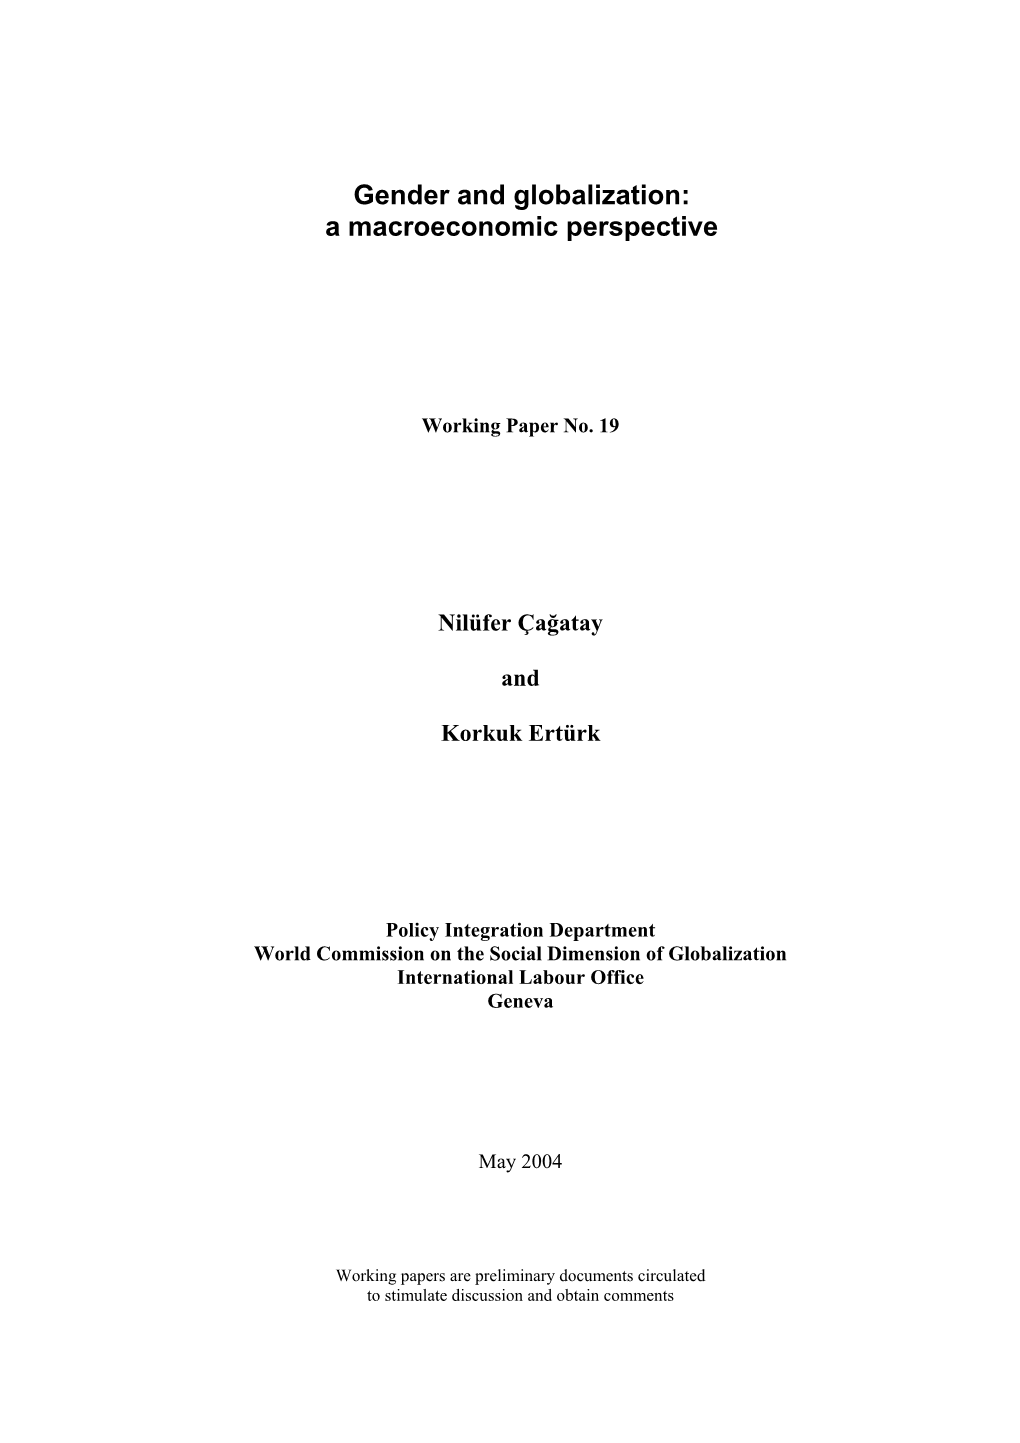 Gender and Globalization: a Macroeconomic Perspective